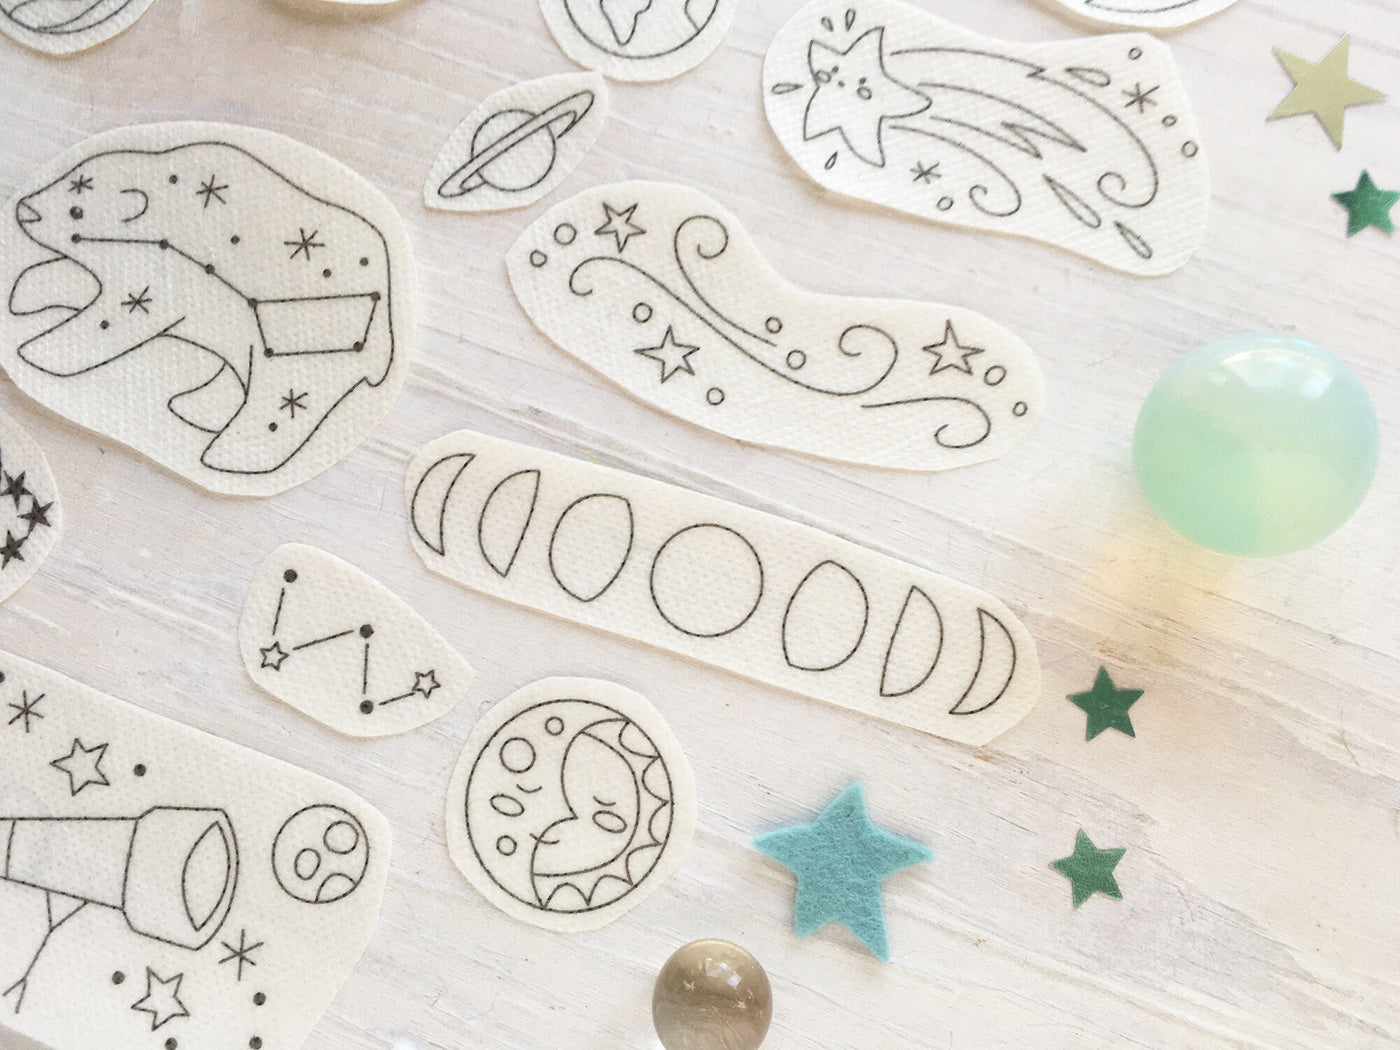 19 Celestial Stick and Stitch hand embroidery patterns